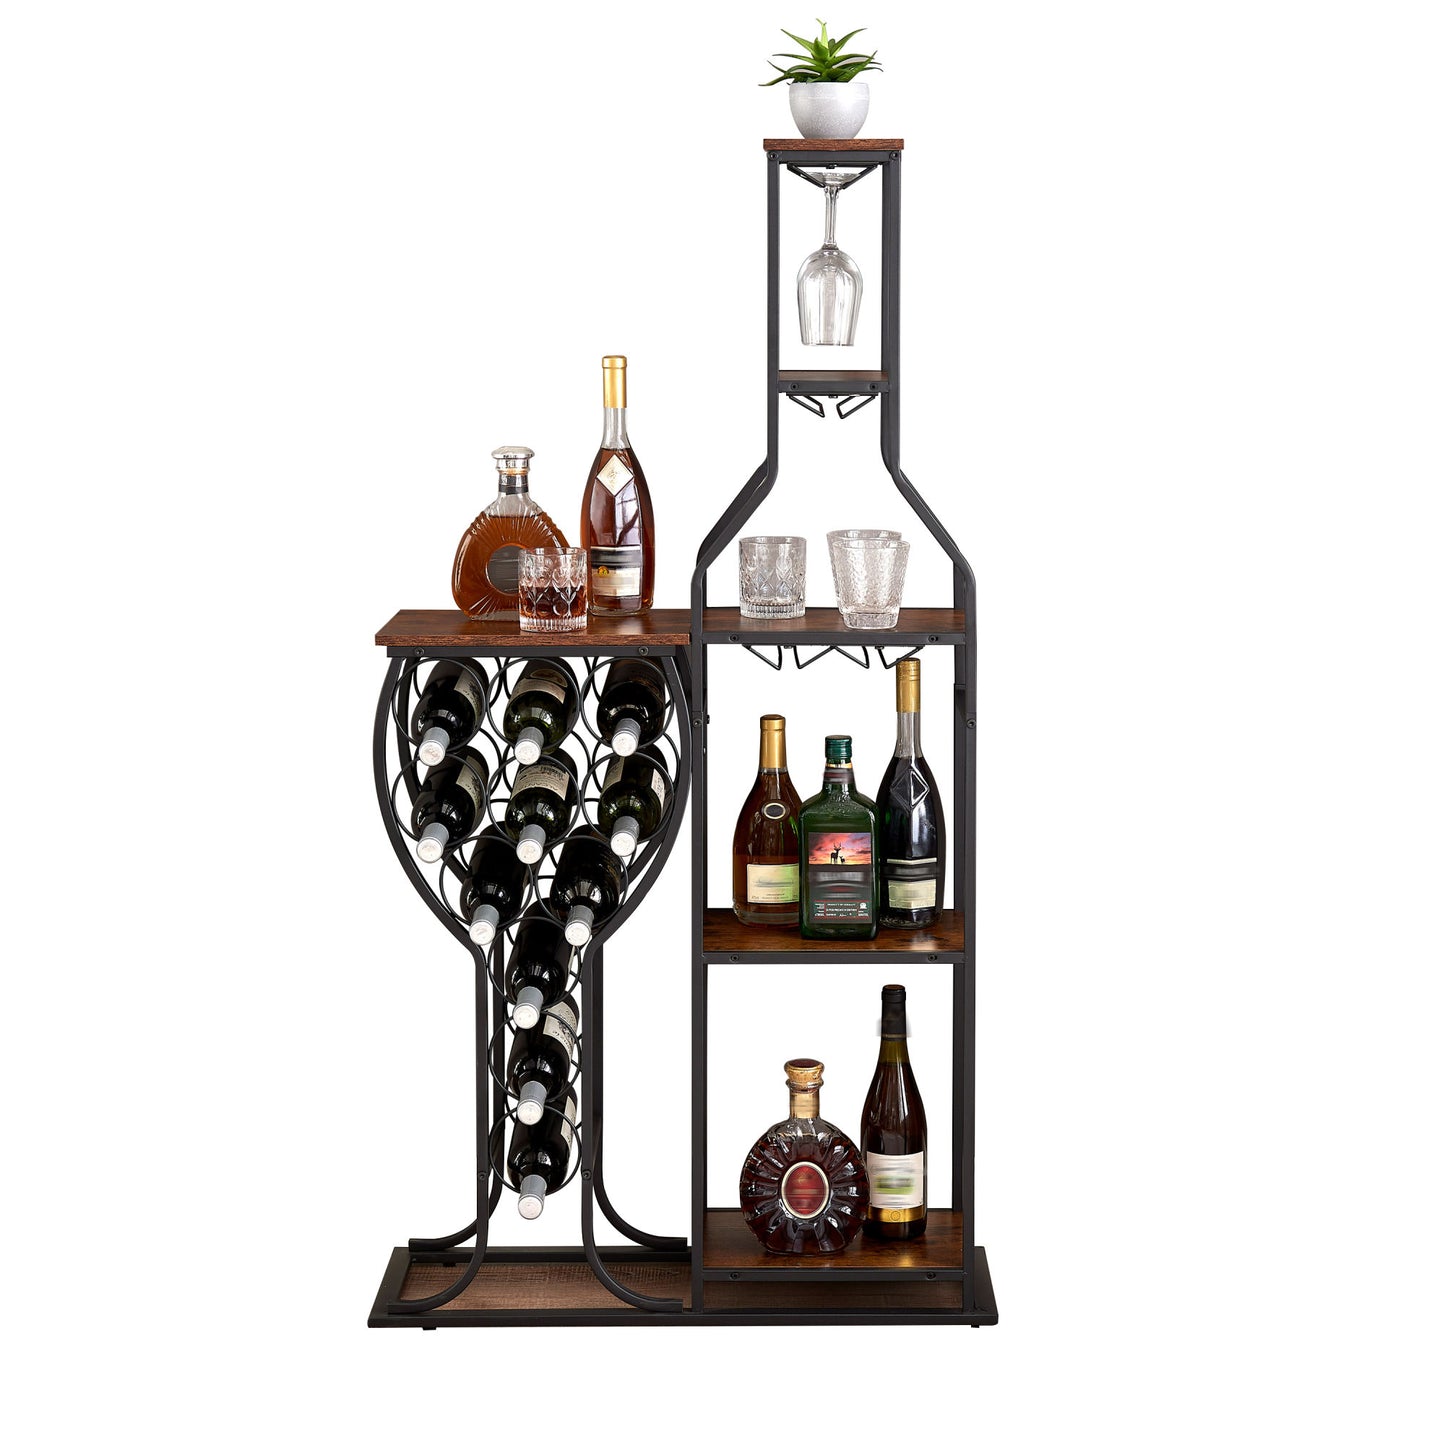 Unique Standing 11 Bottle Wine Rack, 5 Tier Freestanding Wine Rack with Hanging Wine Glass Holder and Storage Shelves, Wine Storage Home Bar for Liquor and Wine Storagefor Kitchen, Dining Room